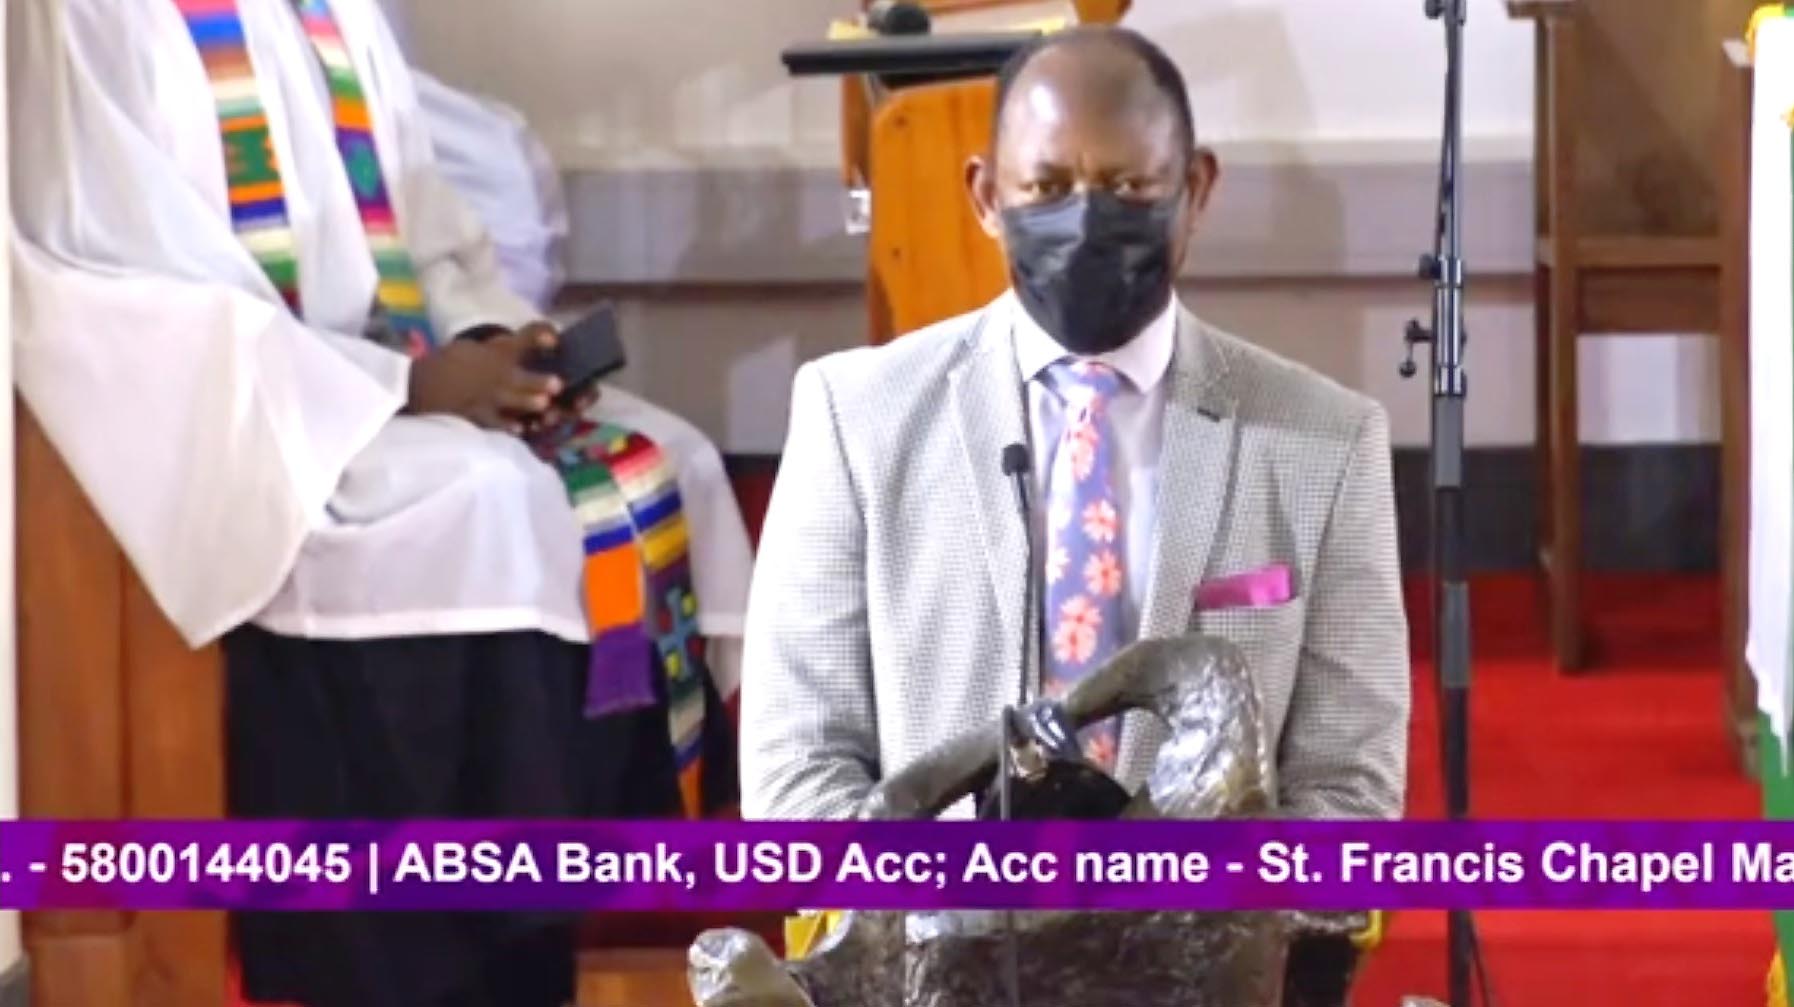 The Vice Chancellor, Prof. Barnabas Nawangwe addresses the congregation on 14th February 2021, St. Francis Chapel, Makerere University.